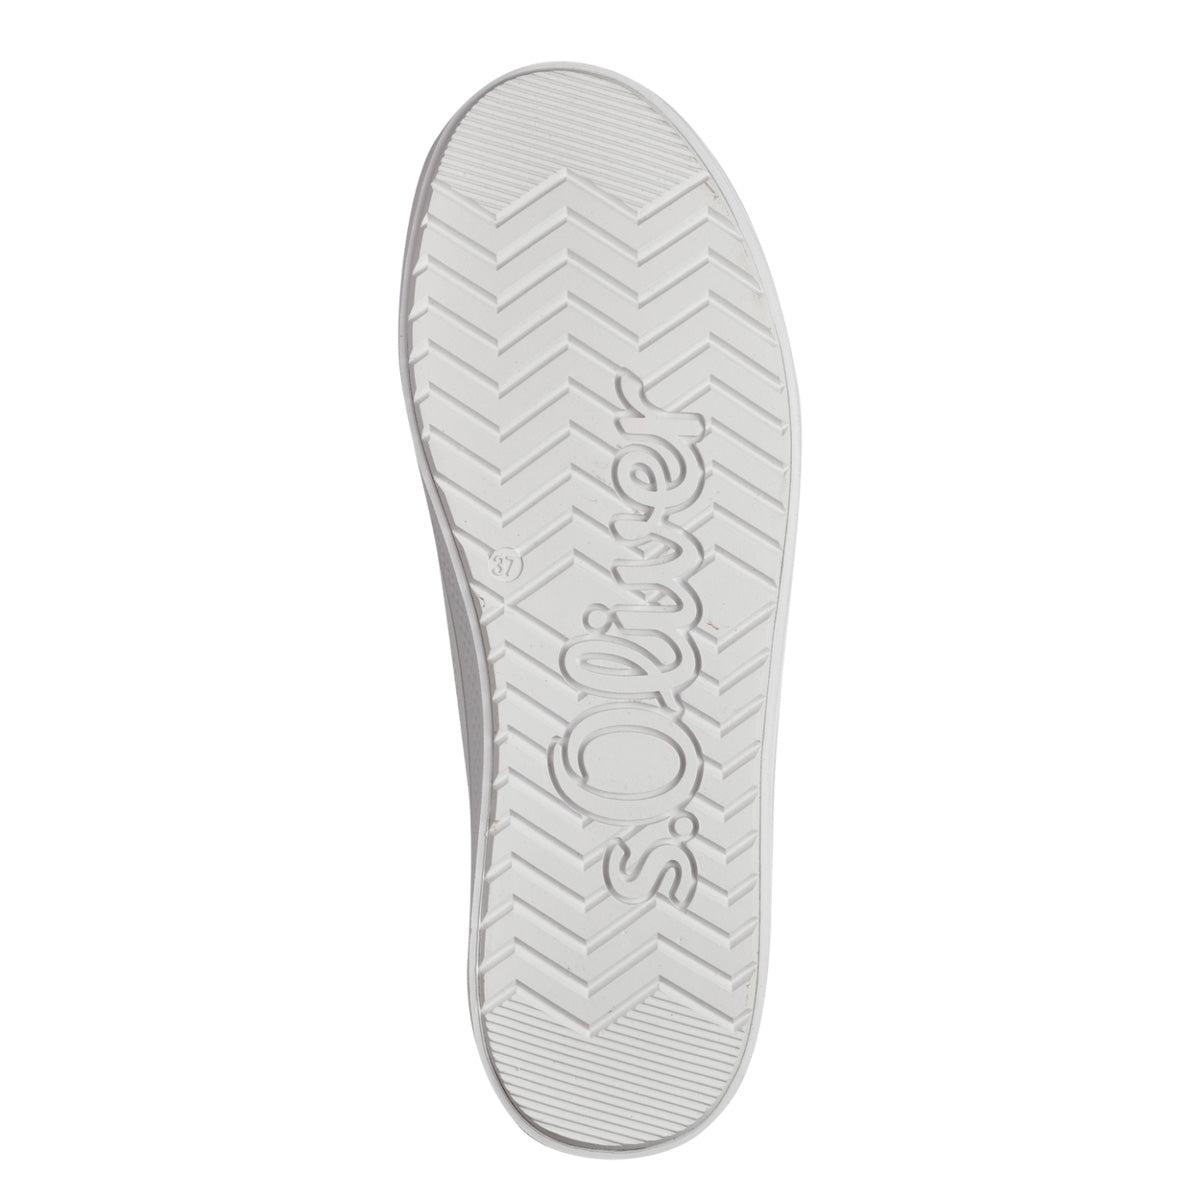     Bottom view of S.Oliver Sneakers,  revealing the white flat sole and clean design.